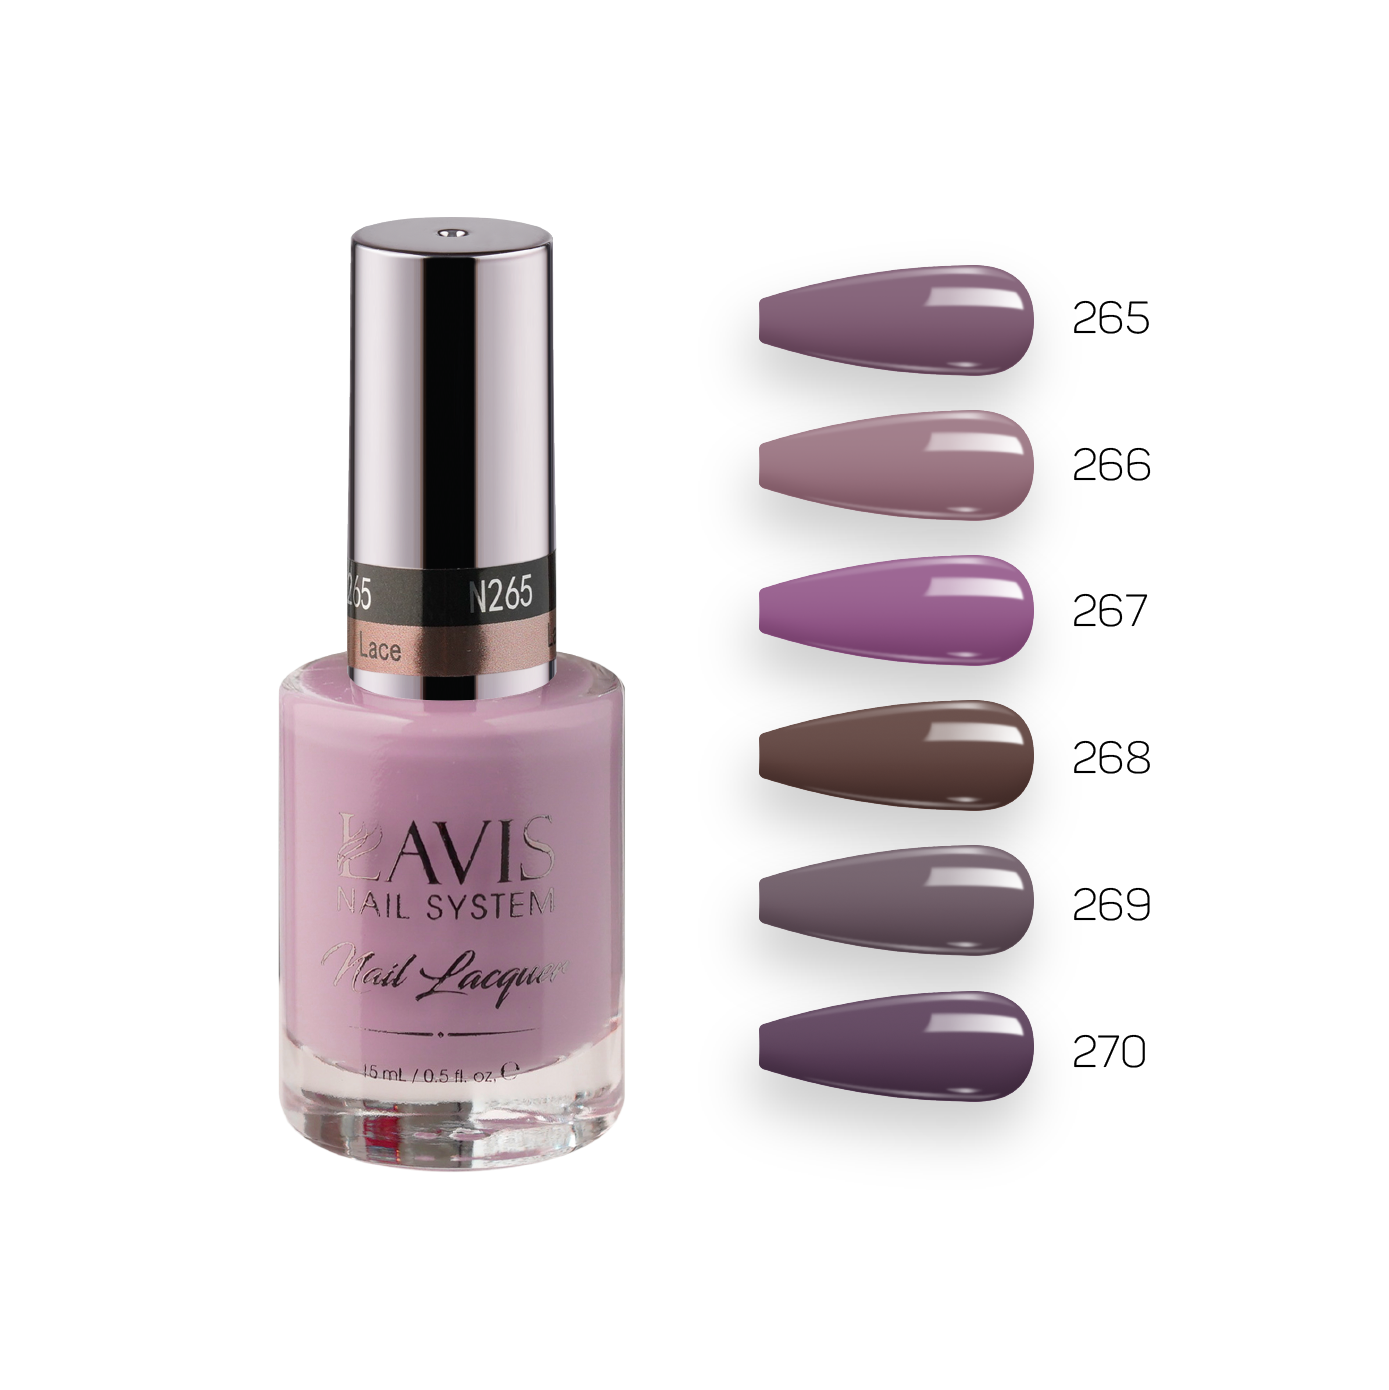 Lavis Healthy Nail Lacquer Fall Winter Set N7 (6 colors) : 265, 266, 267, 268, 269, 270